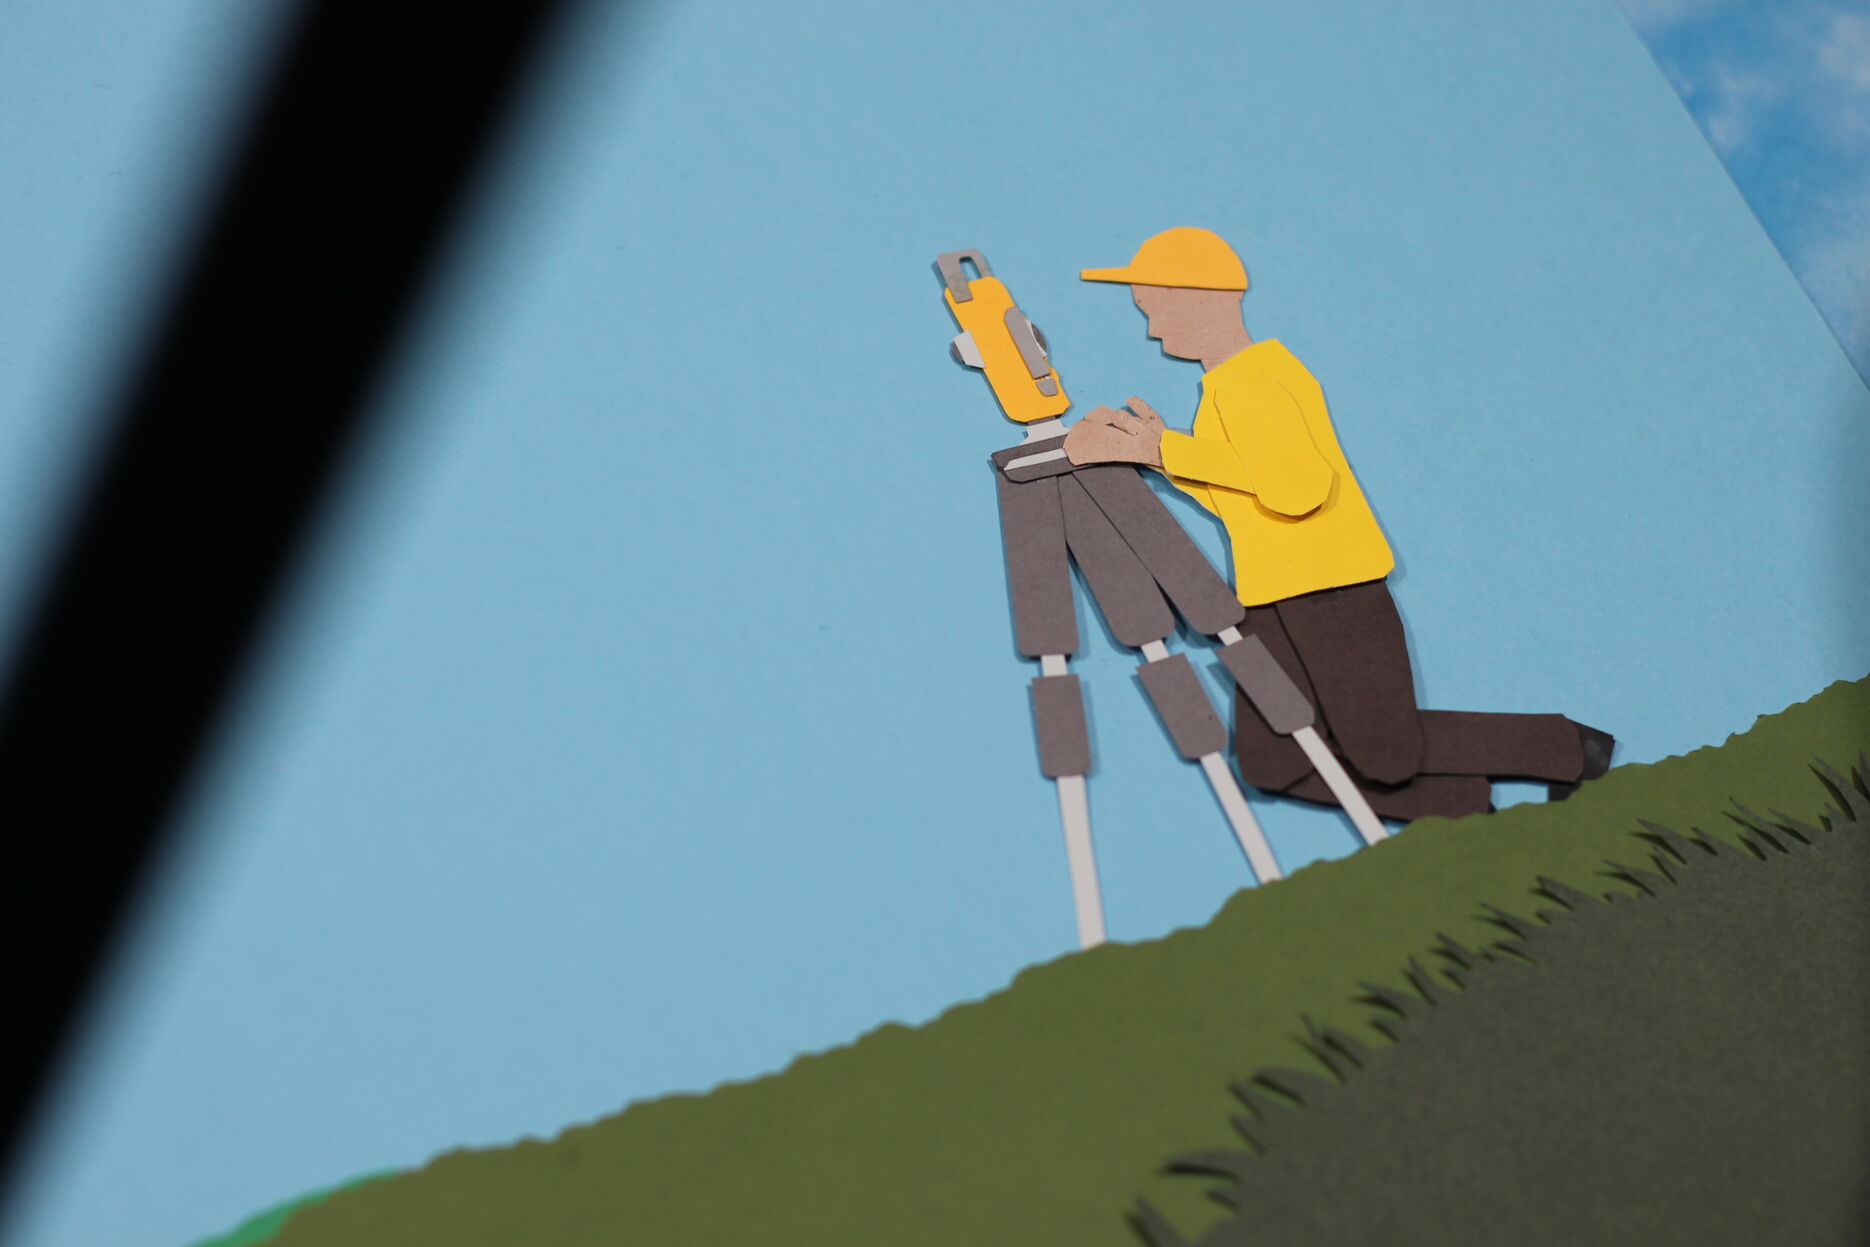 A still from an animation made out of cut paper. A man operates a film camera in the image.